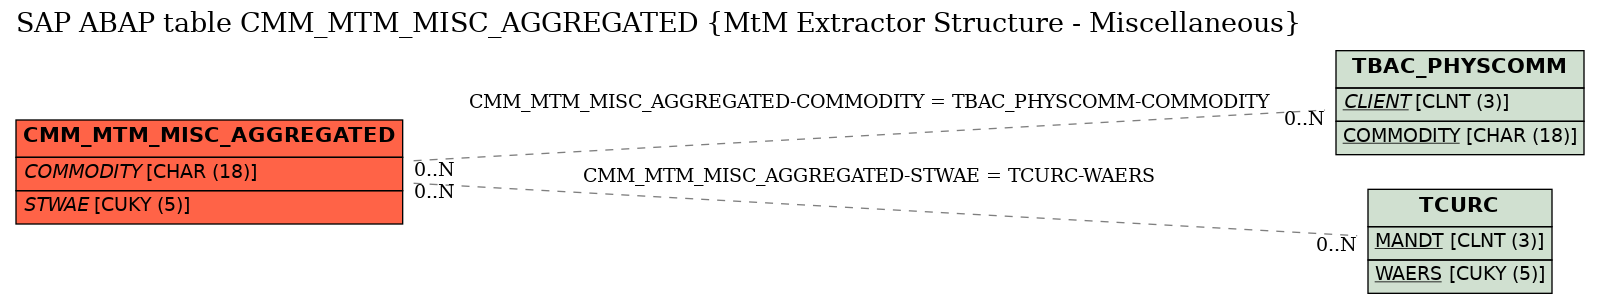 E-R Diagram for table CMM_MTM_MISC_AGGREGATED (MtM Extractor Structure - Miscellaneous)